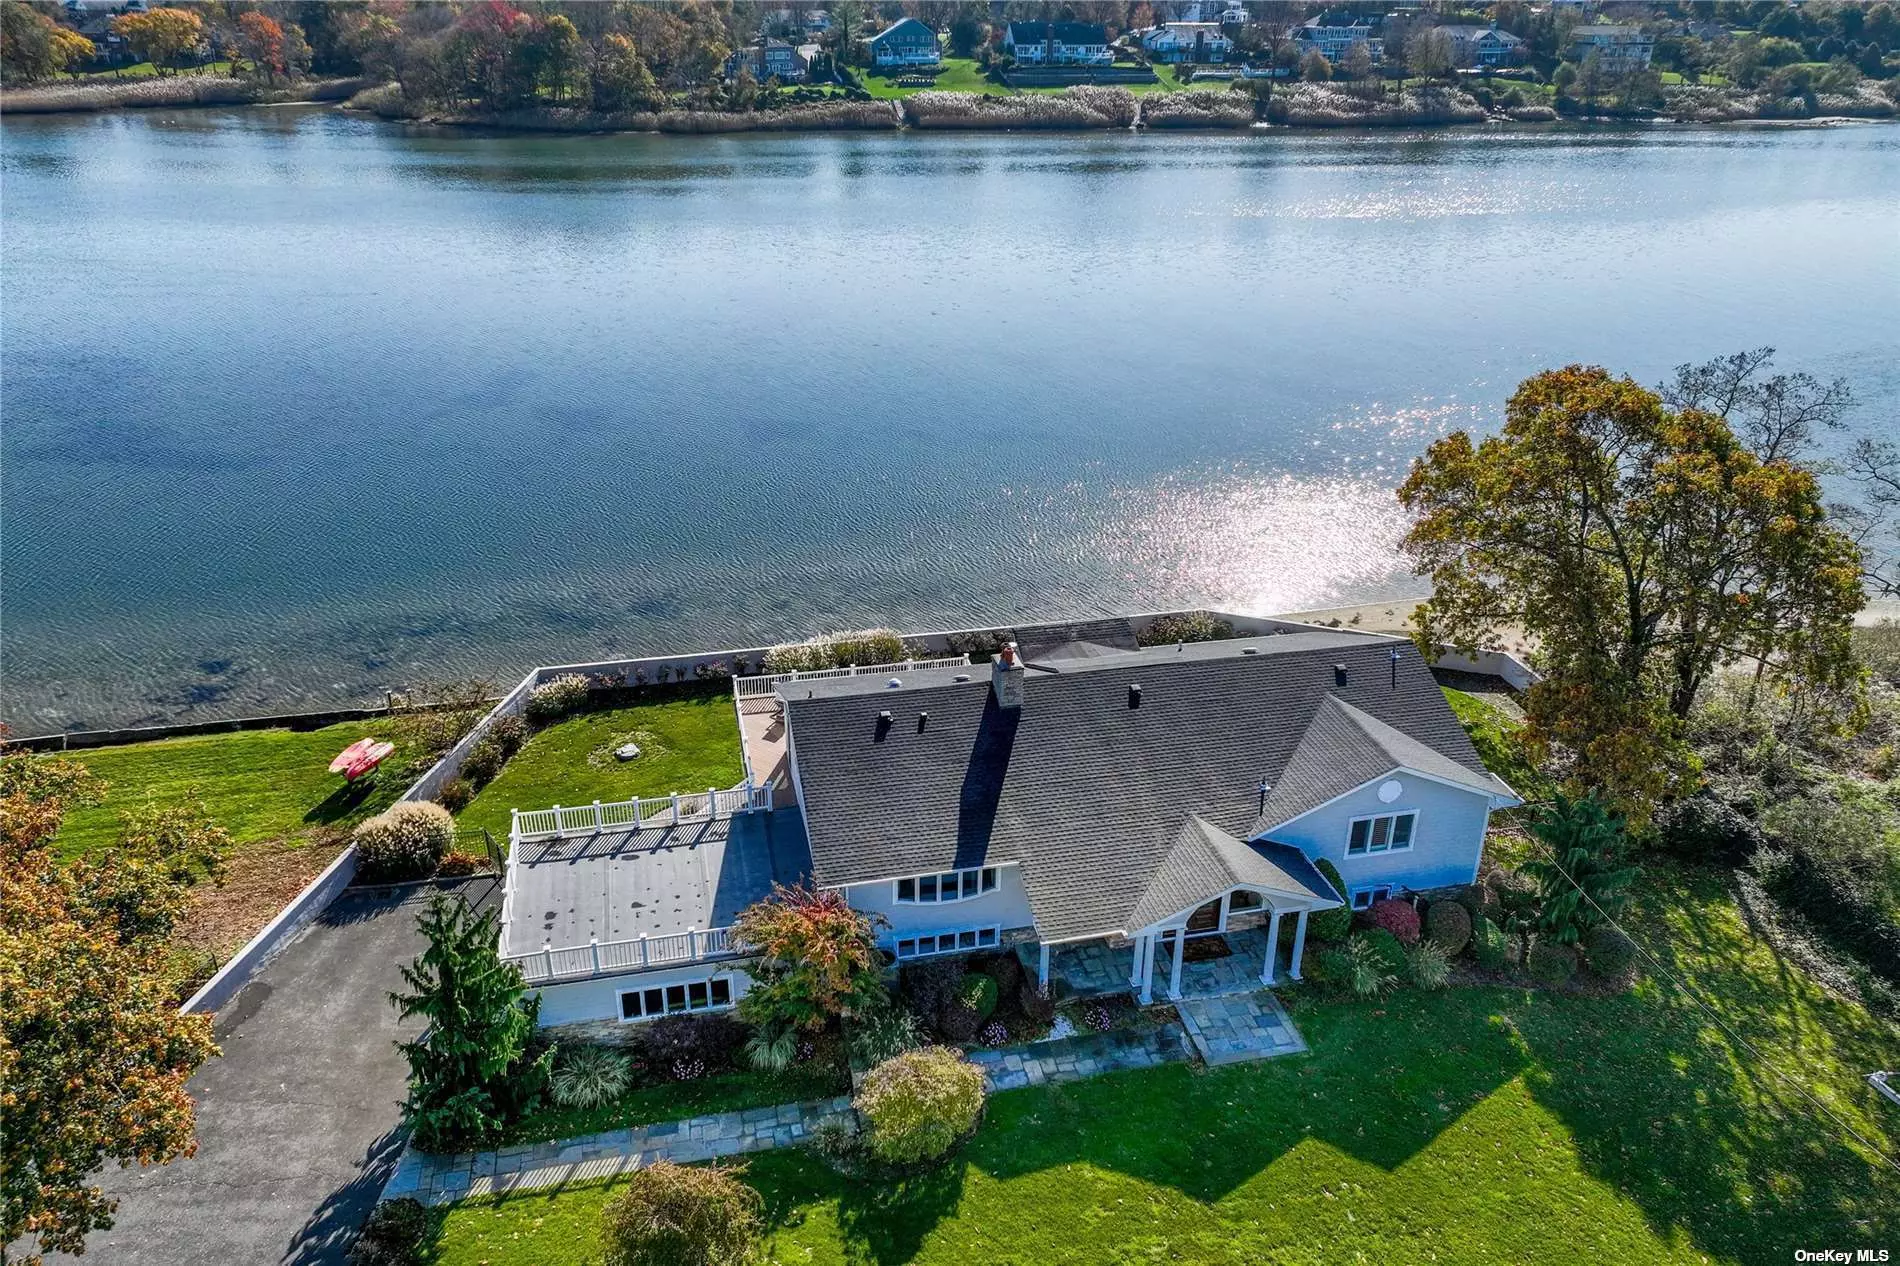 Experience year-round luxury and tranquility with breathtaking waterfront views at 2 Southland Drive. Nestled on an expansive lot within Glen Cove on desirable Morgan&rsquo;s Island, this exceptional residence has been thoughtfully updated and meticulously renovated. Located just an hour away from the heart of NYC, your waterfront oasis awaits. A fully modernized home showcasing the ultimate venue for entertaining. Boasting five generously appointed bedrooms and four full baths, this residence features an open and spacious floor plan, with captivating views from every corner. Step outside to your private patio, deck, and yard, offering ample space for a potential pool or pickleball court, all overlooking the serene Dosoris Pond. In addition to these amenities, you&rsquo;ll also enjoy exclusive beach rights, partake in vibrant community events, have convenient access to a nearby boat launch, and more. This rare opportunity presents a waterfront haven on the coveted North Shore that seamlessly combines opulence with comfort. Don&rsquo;t let this extraordinary chance slip through your fingers; make your dream of owning a waterfront paradise a reality today!